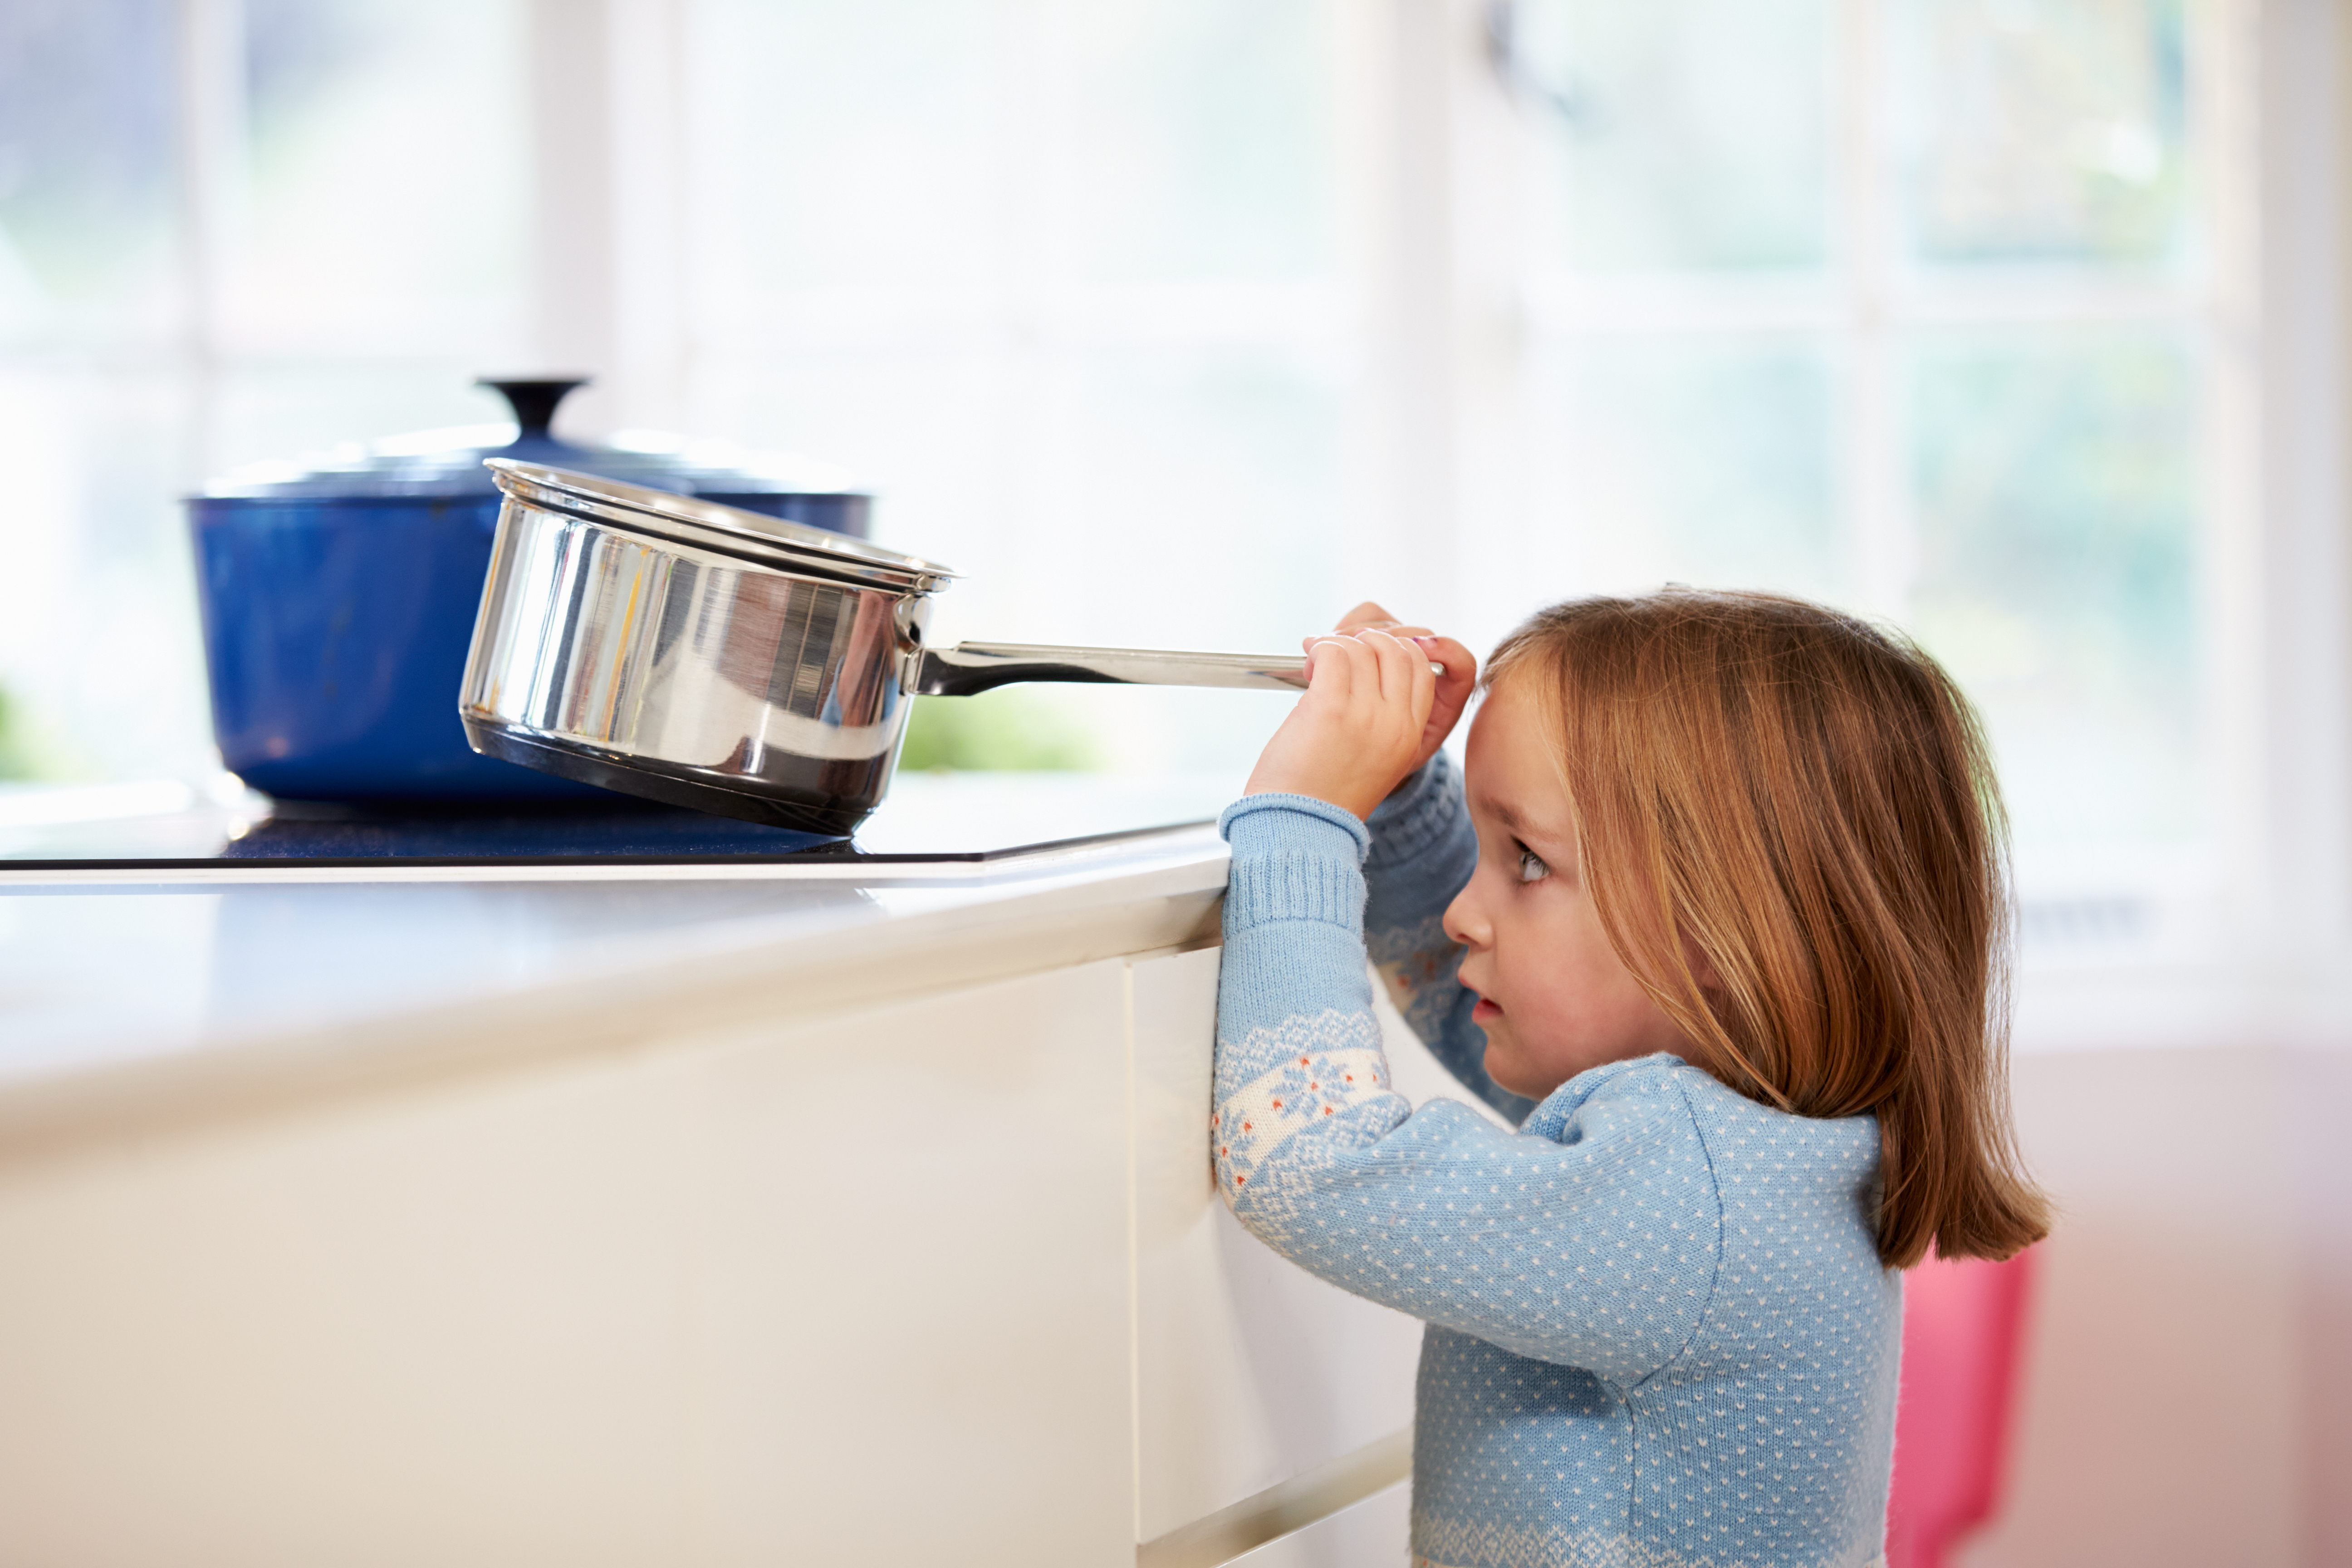 A little girl reaches to hold a pot handle on a hot stove, tilting the pot toward her.